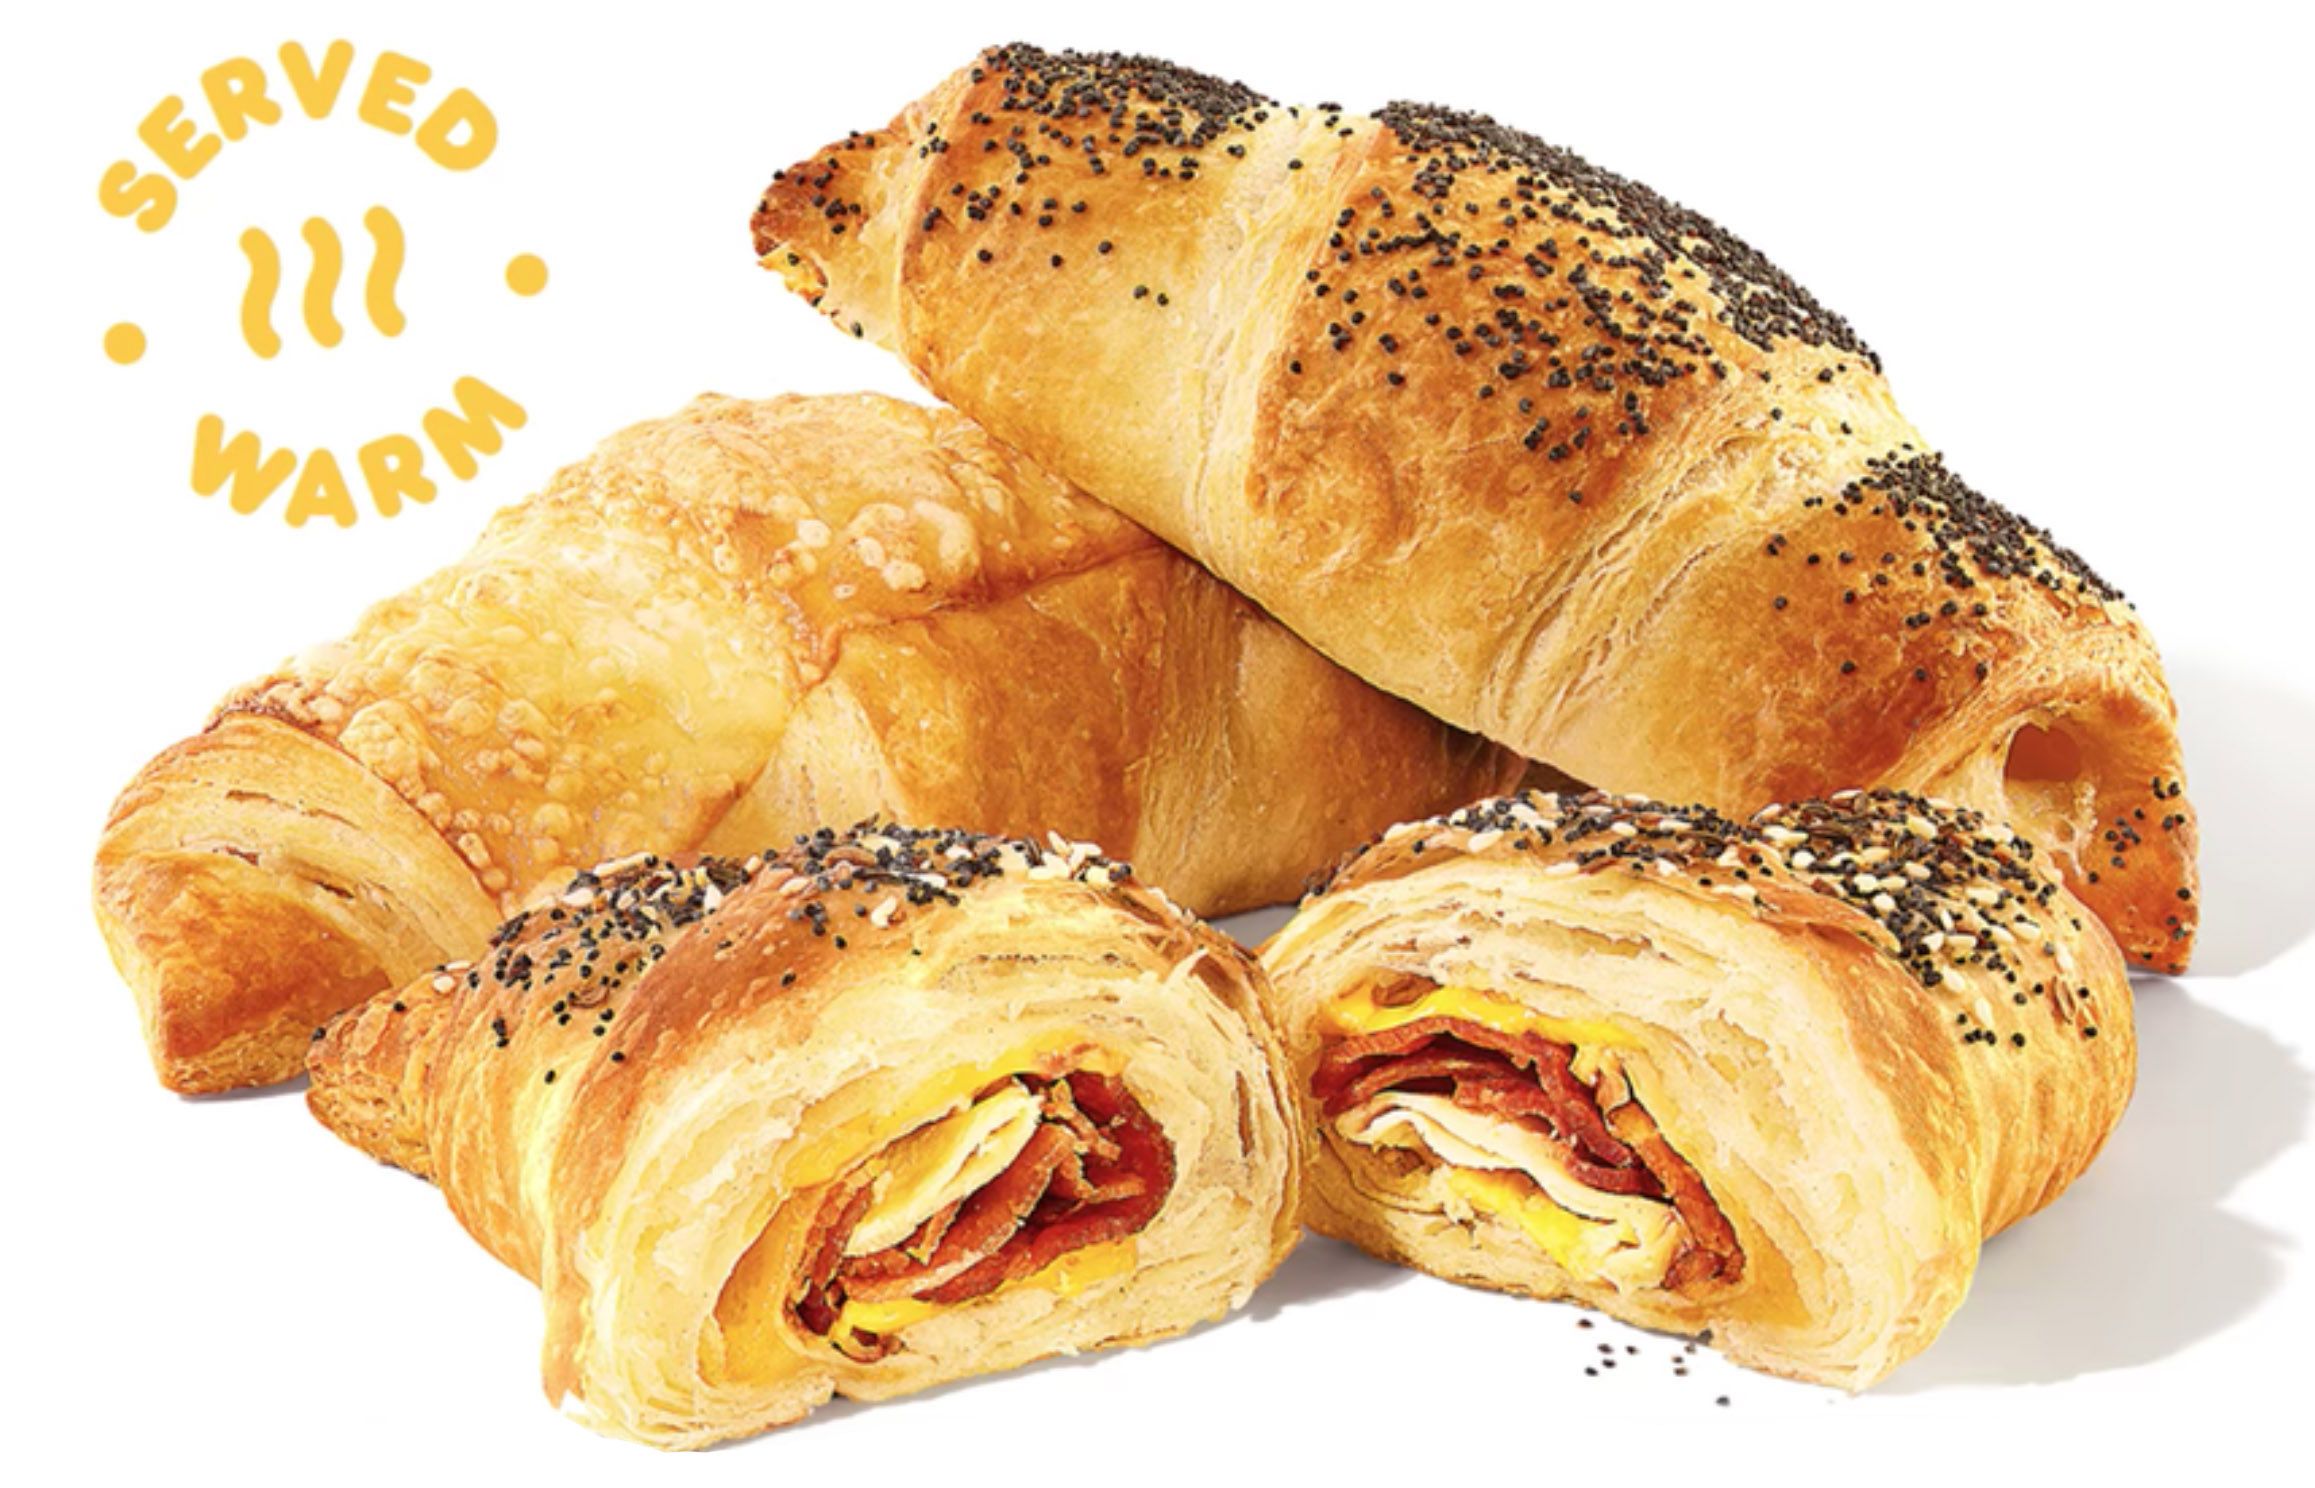 Croissant Stuffers Return to Dunkin' Donuts for a Limited Time Only